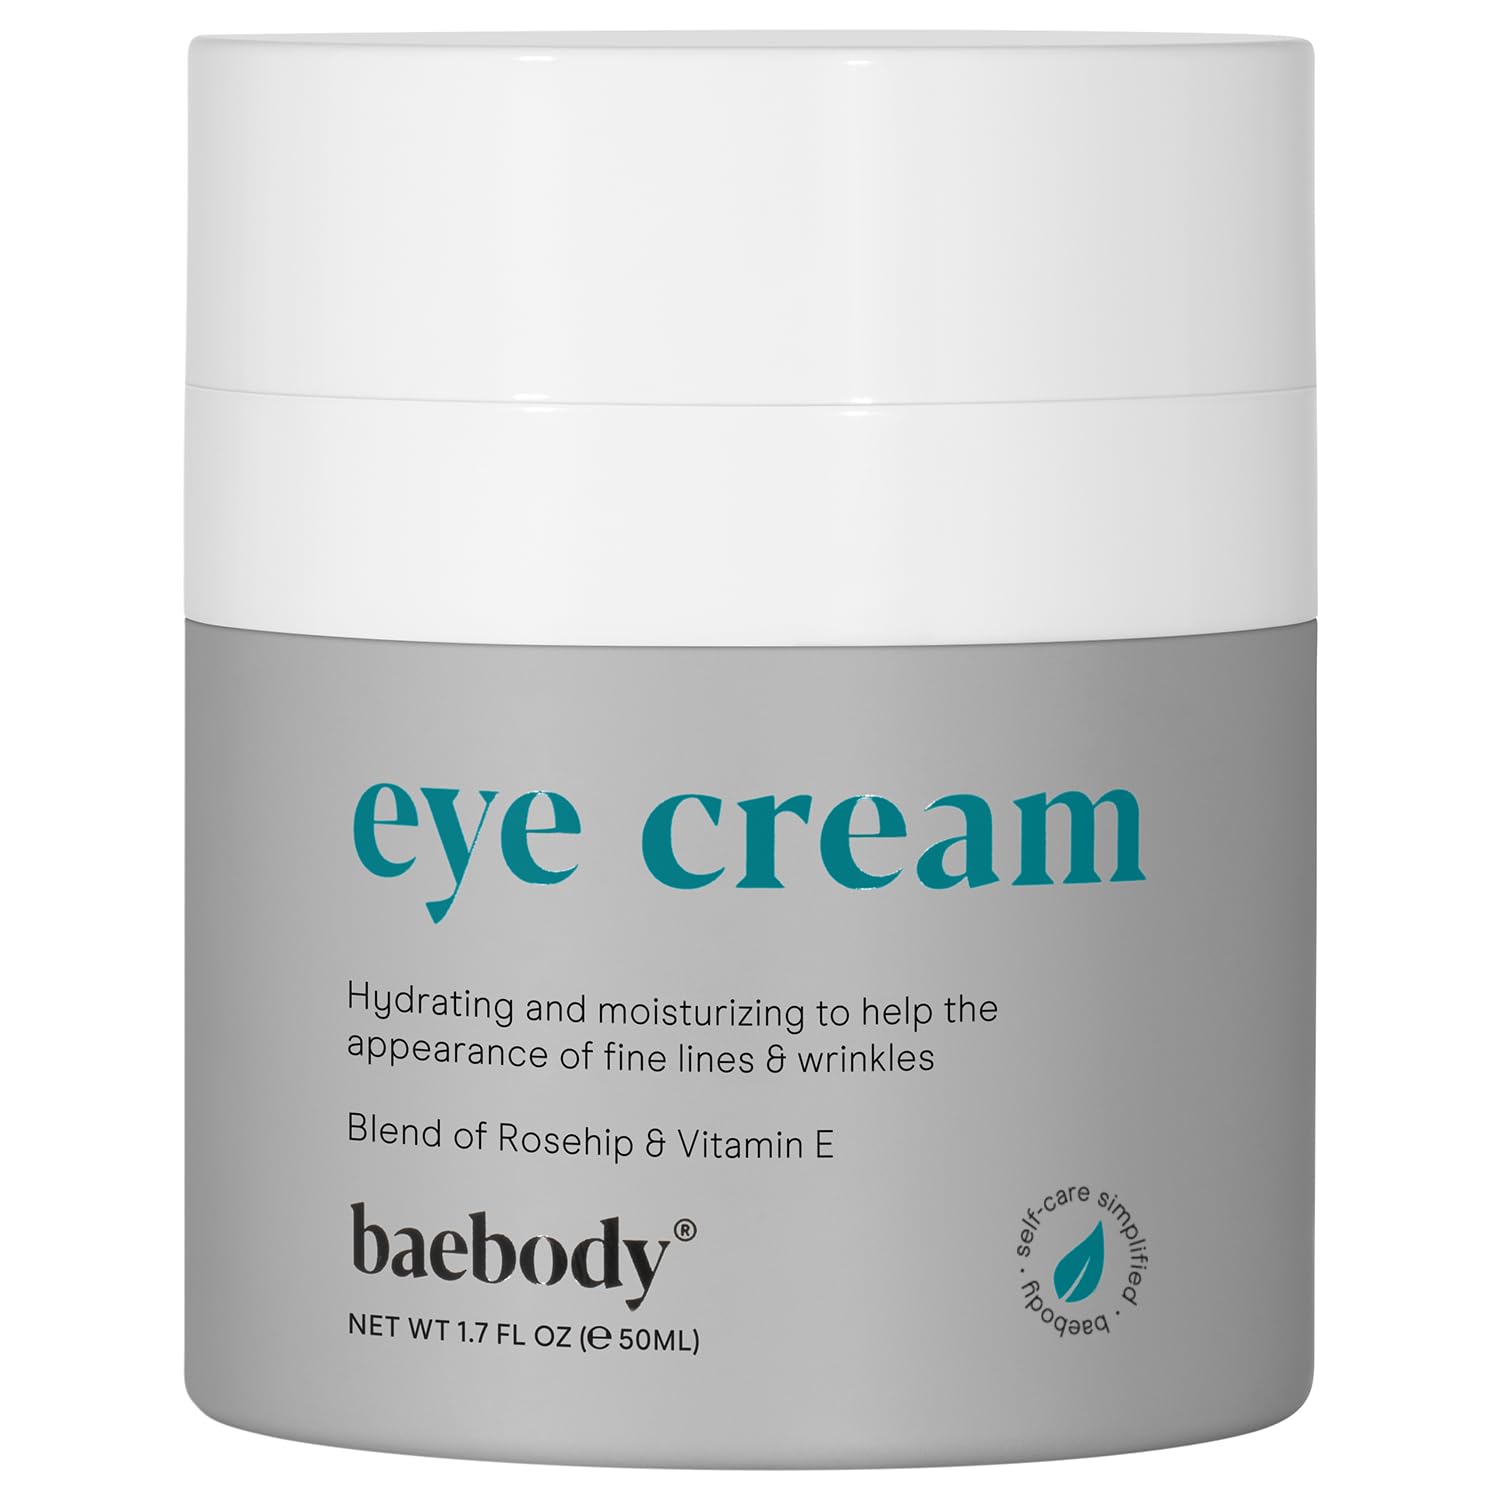 Baebody Critically Acclaimed Brightening Under Eye Cream - Best Anti Aging Eye Cream for Dark Circles, Puffiness, Fine Lines, and Wrinkles, 1.7